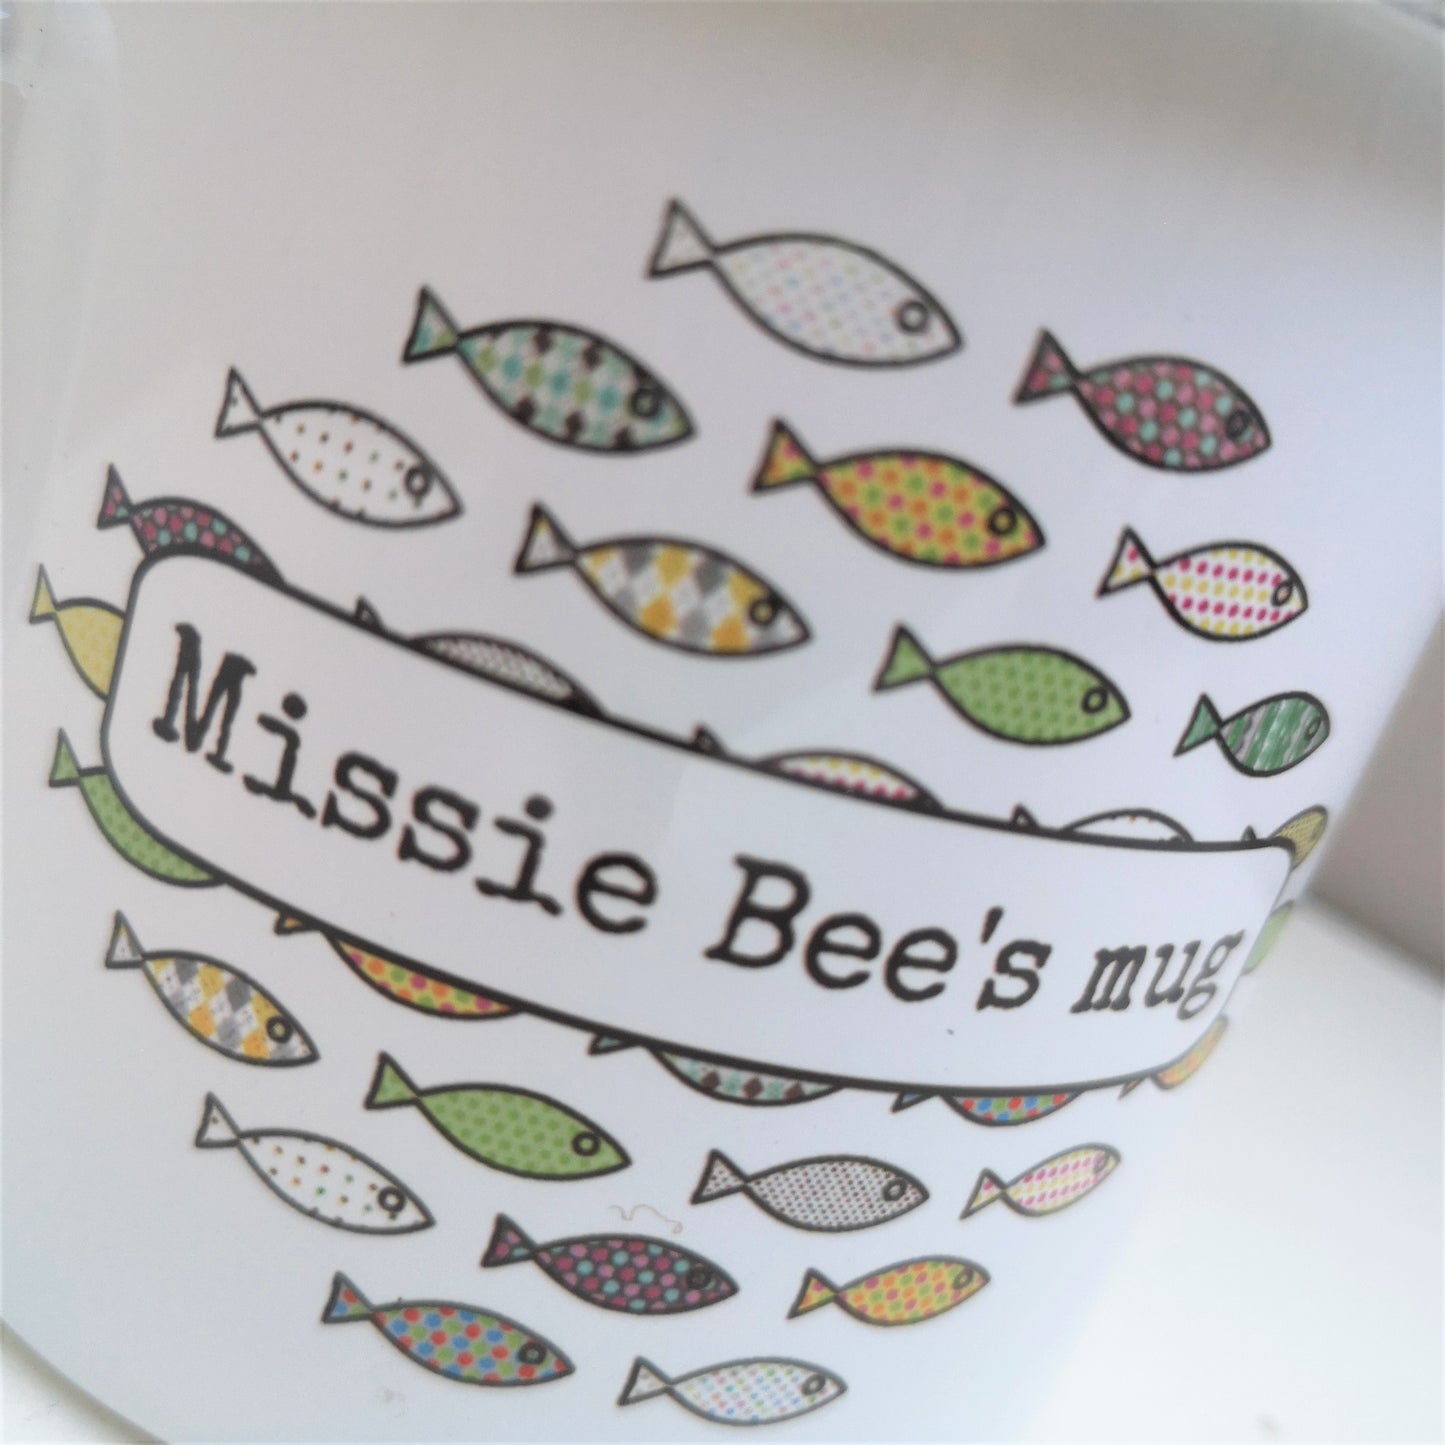 A close up photo of a white enamel mug, with a colourful shoal of fish on the front, overlayed with the owner's name.